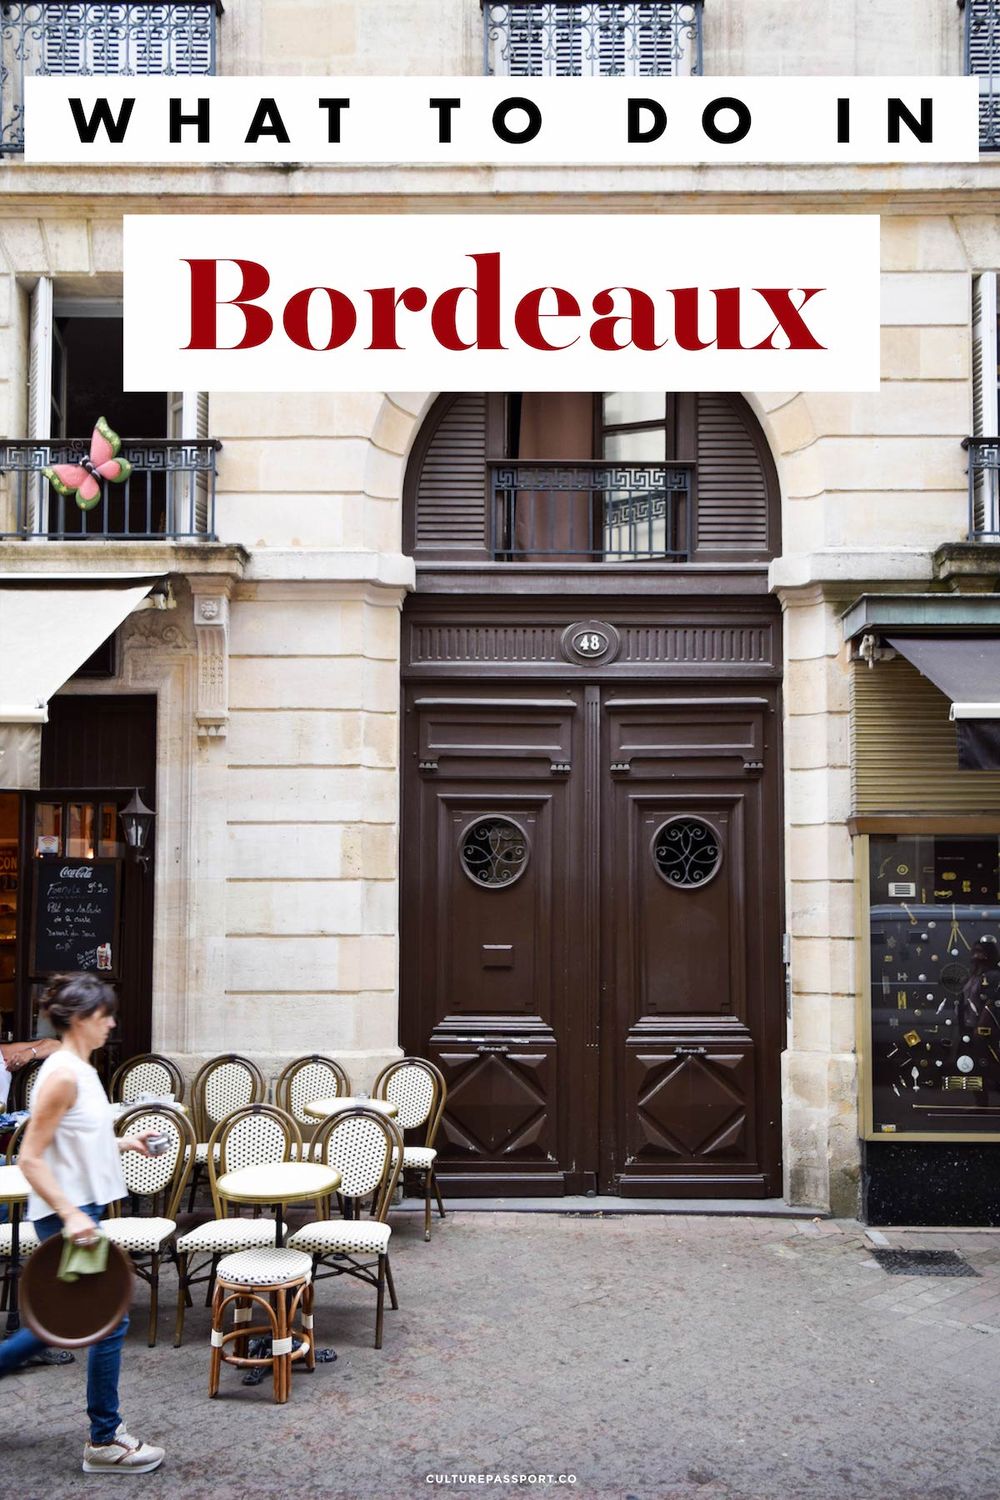 What to do in Bordeaux! #francetravel